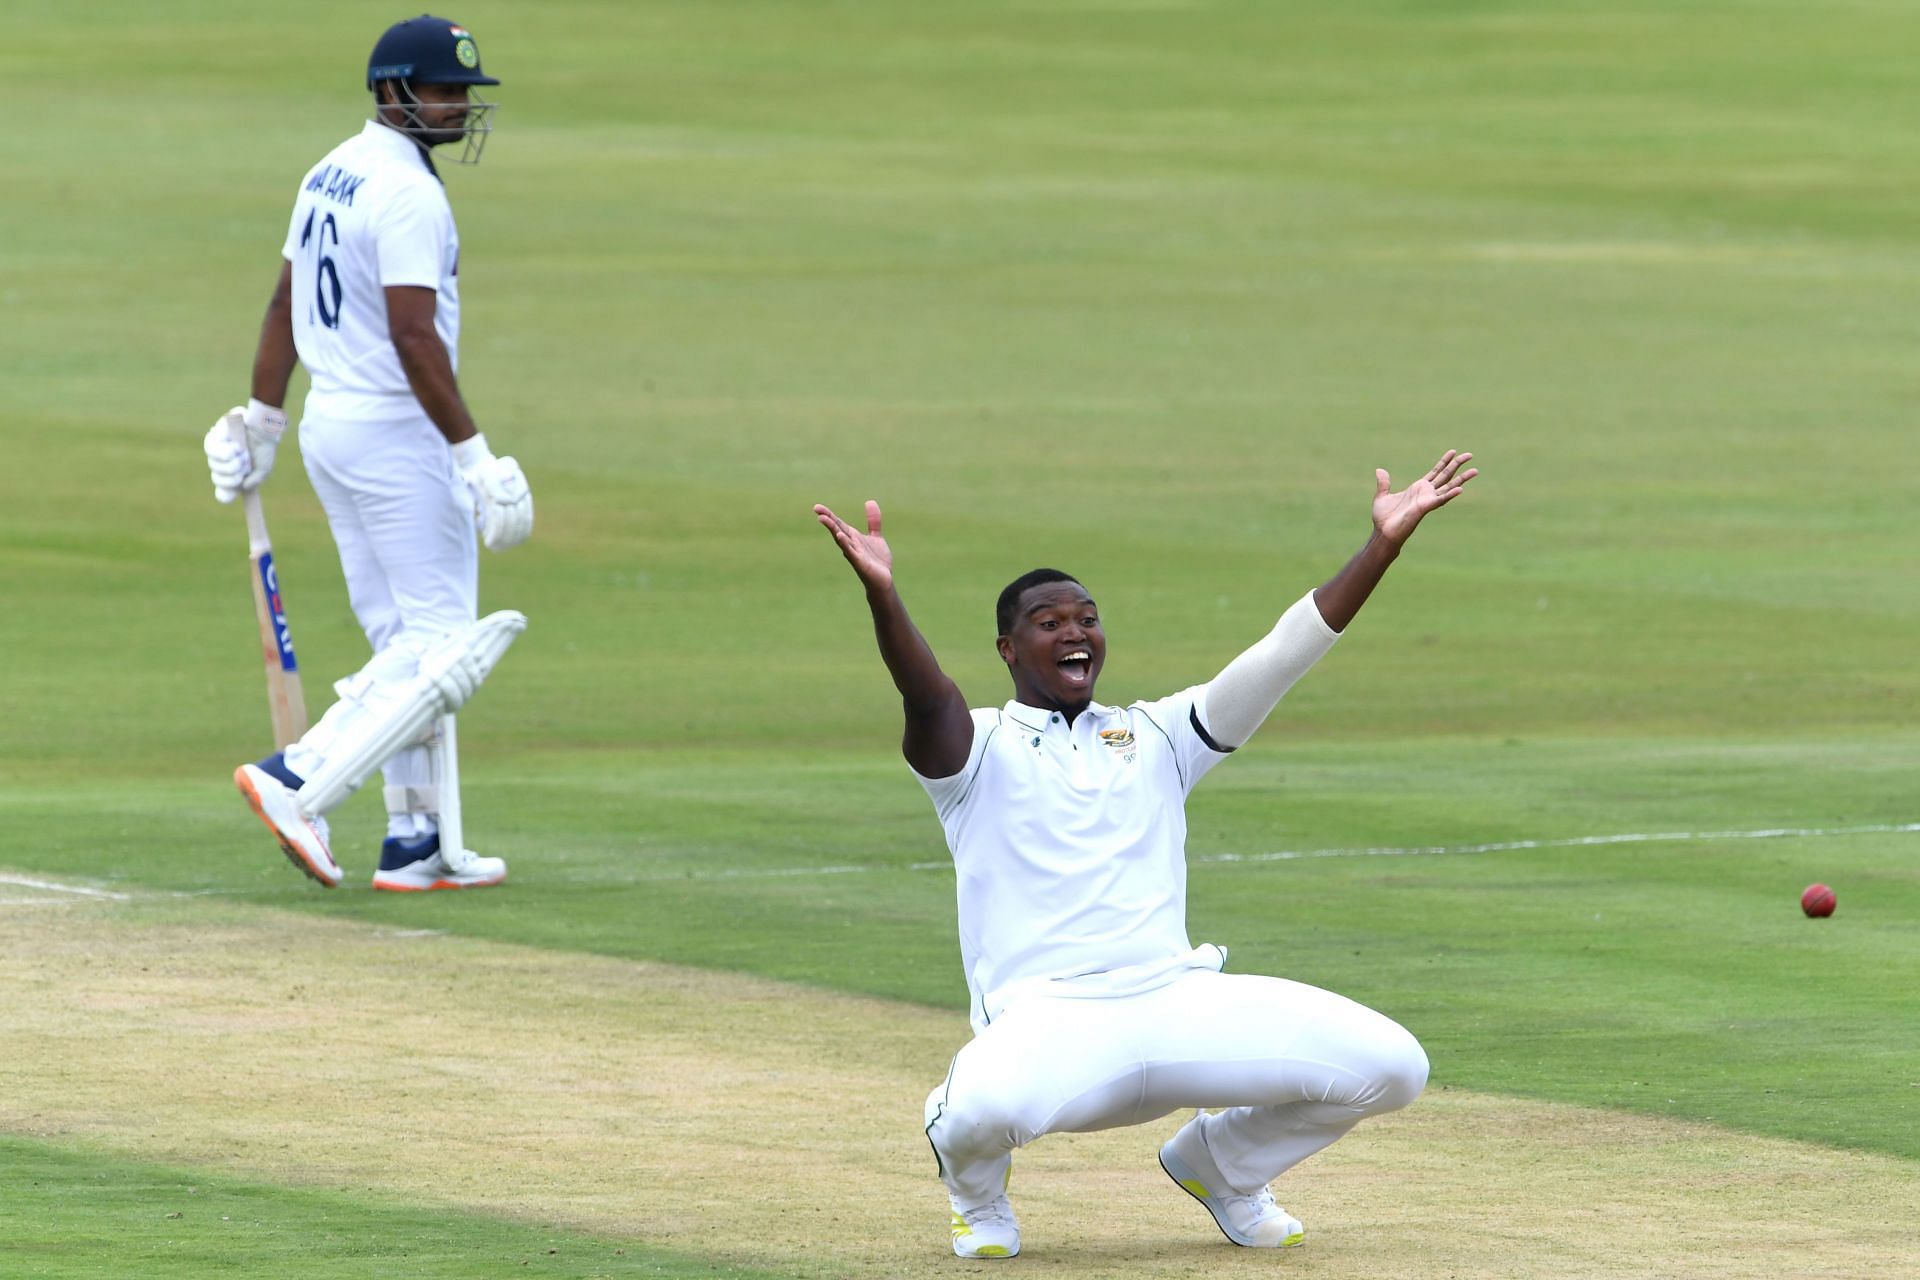 Ngidi is yet to play a T20I on Indian soil